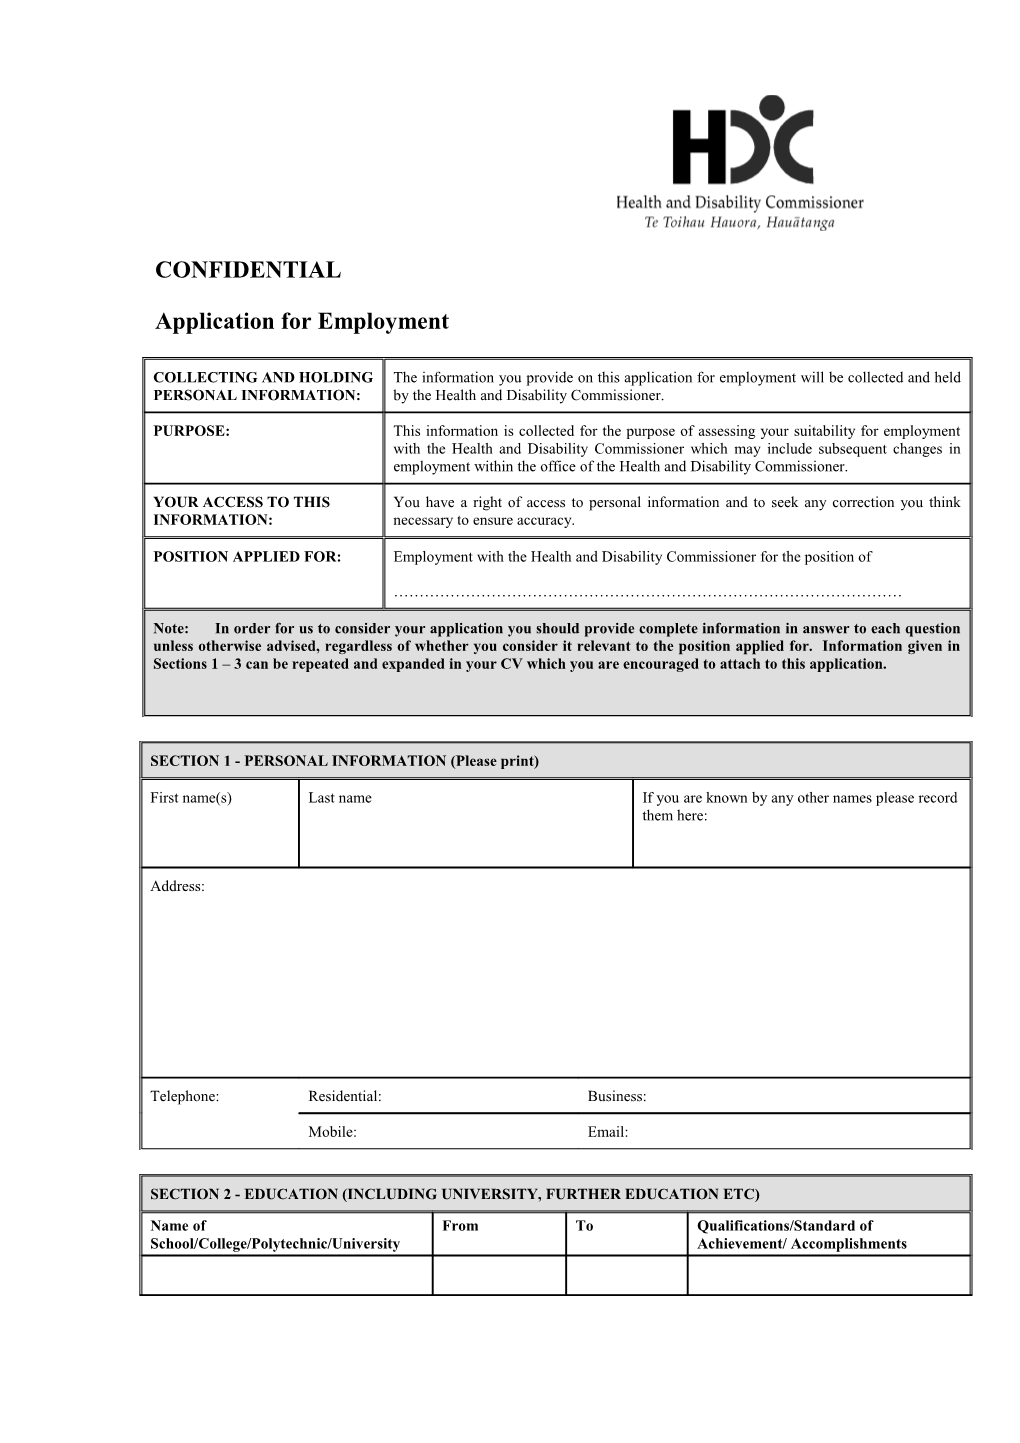 Application for Employment s49